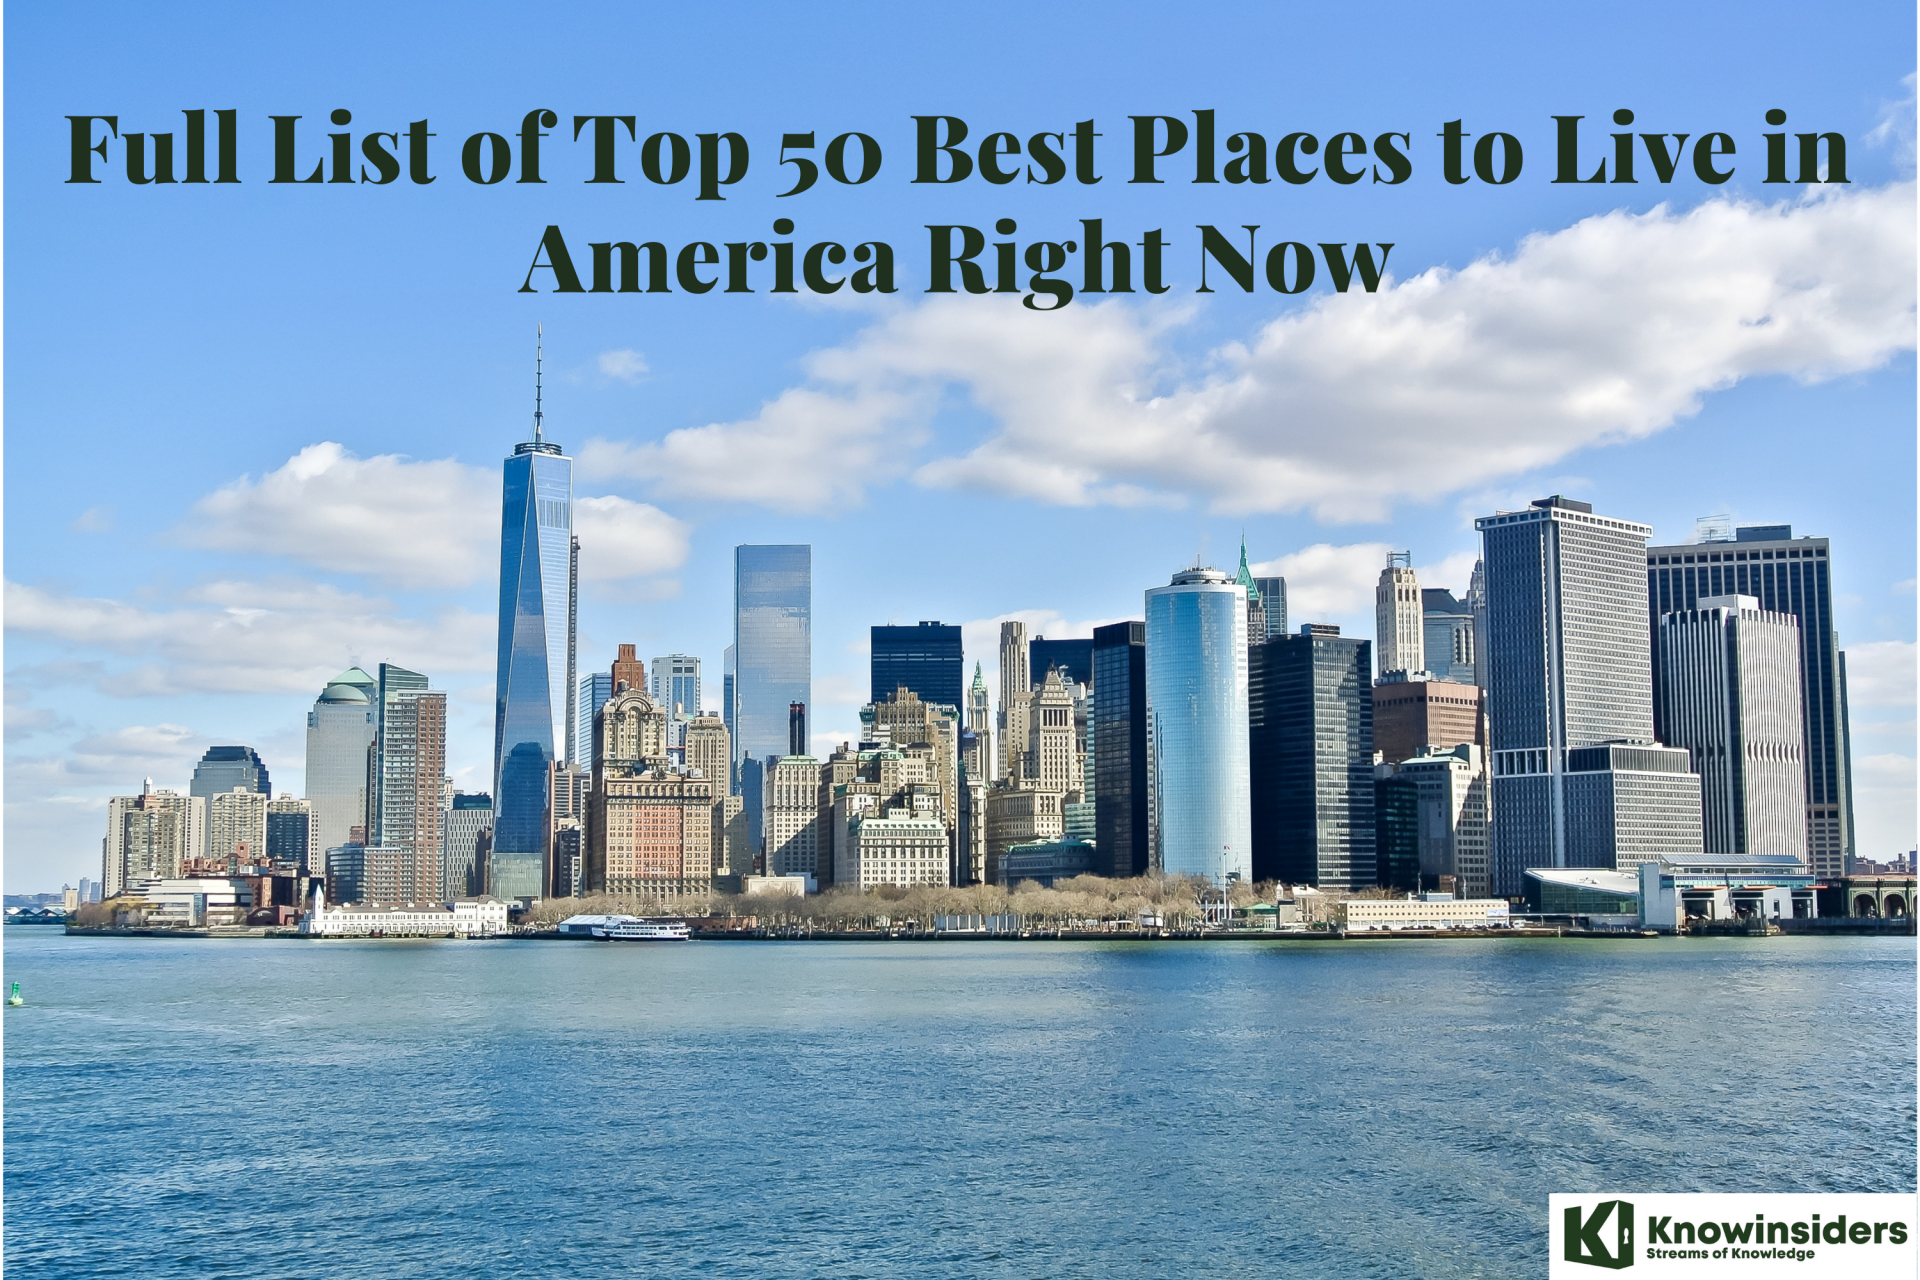 Full List of Top 50 Best Places to Live in America Right Now